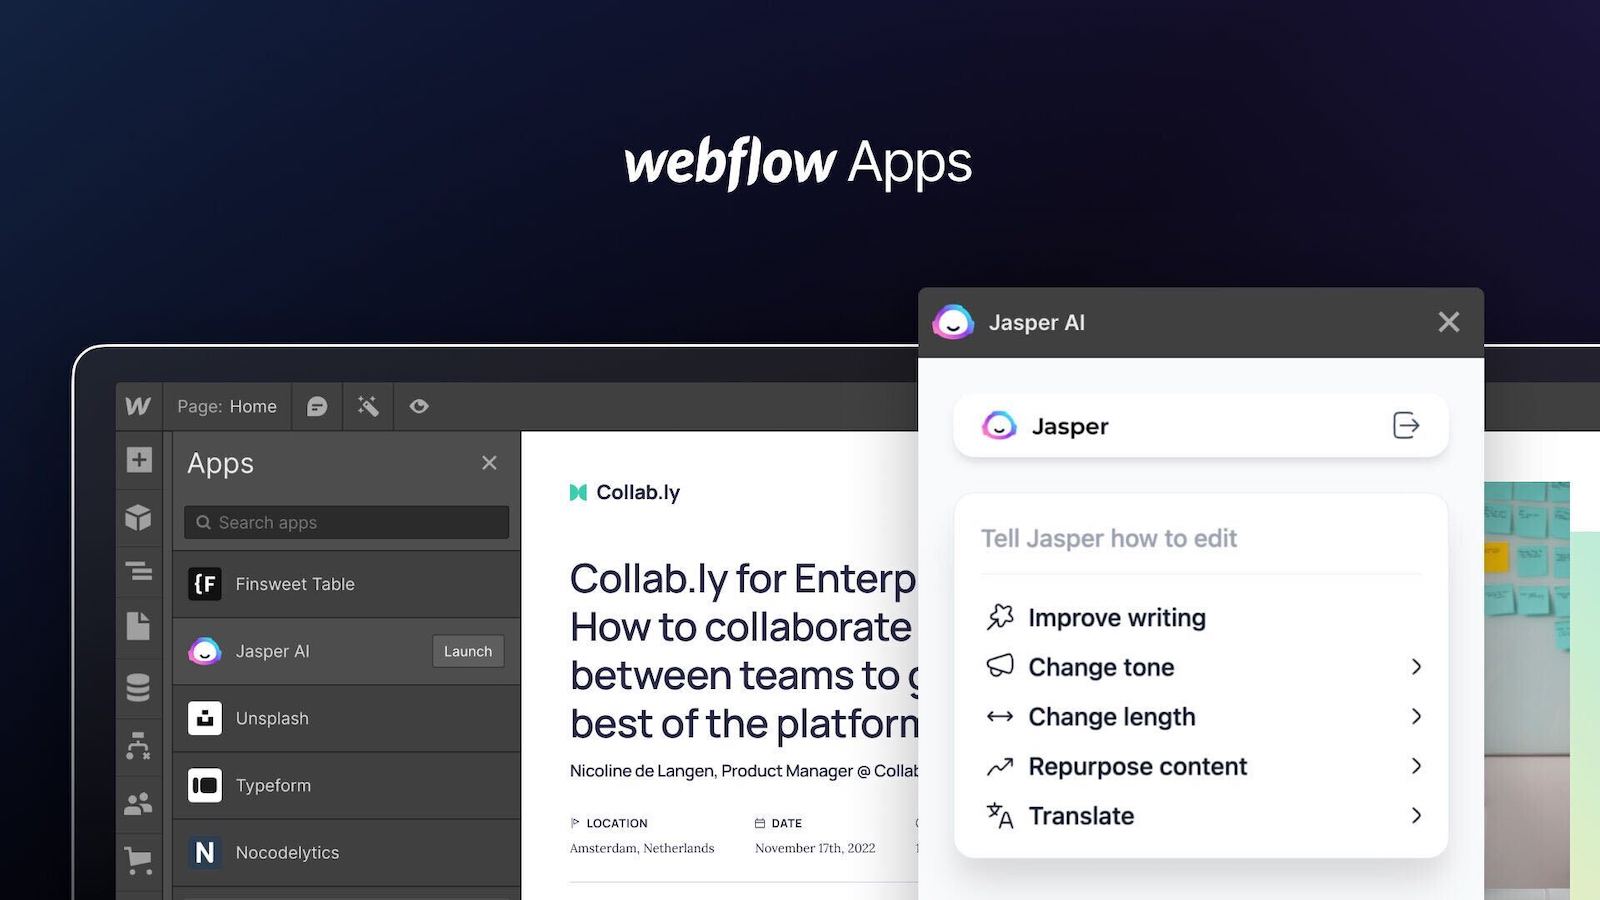 Webflow Apps promo image showing different app screens.